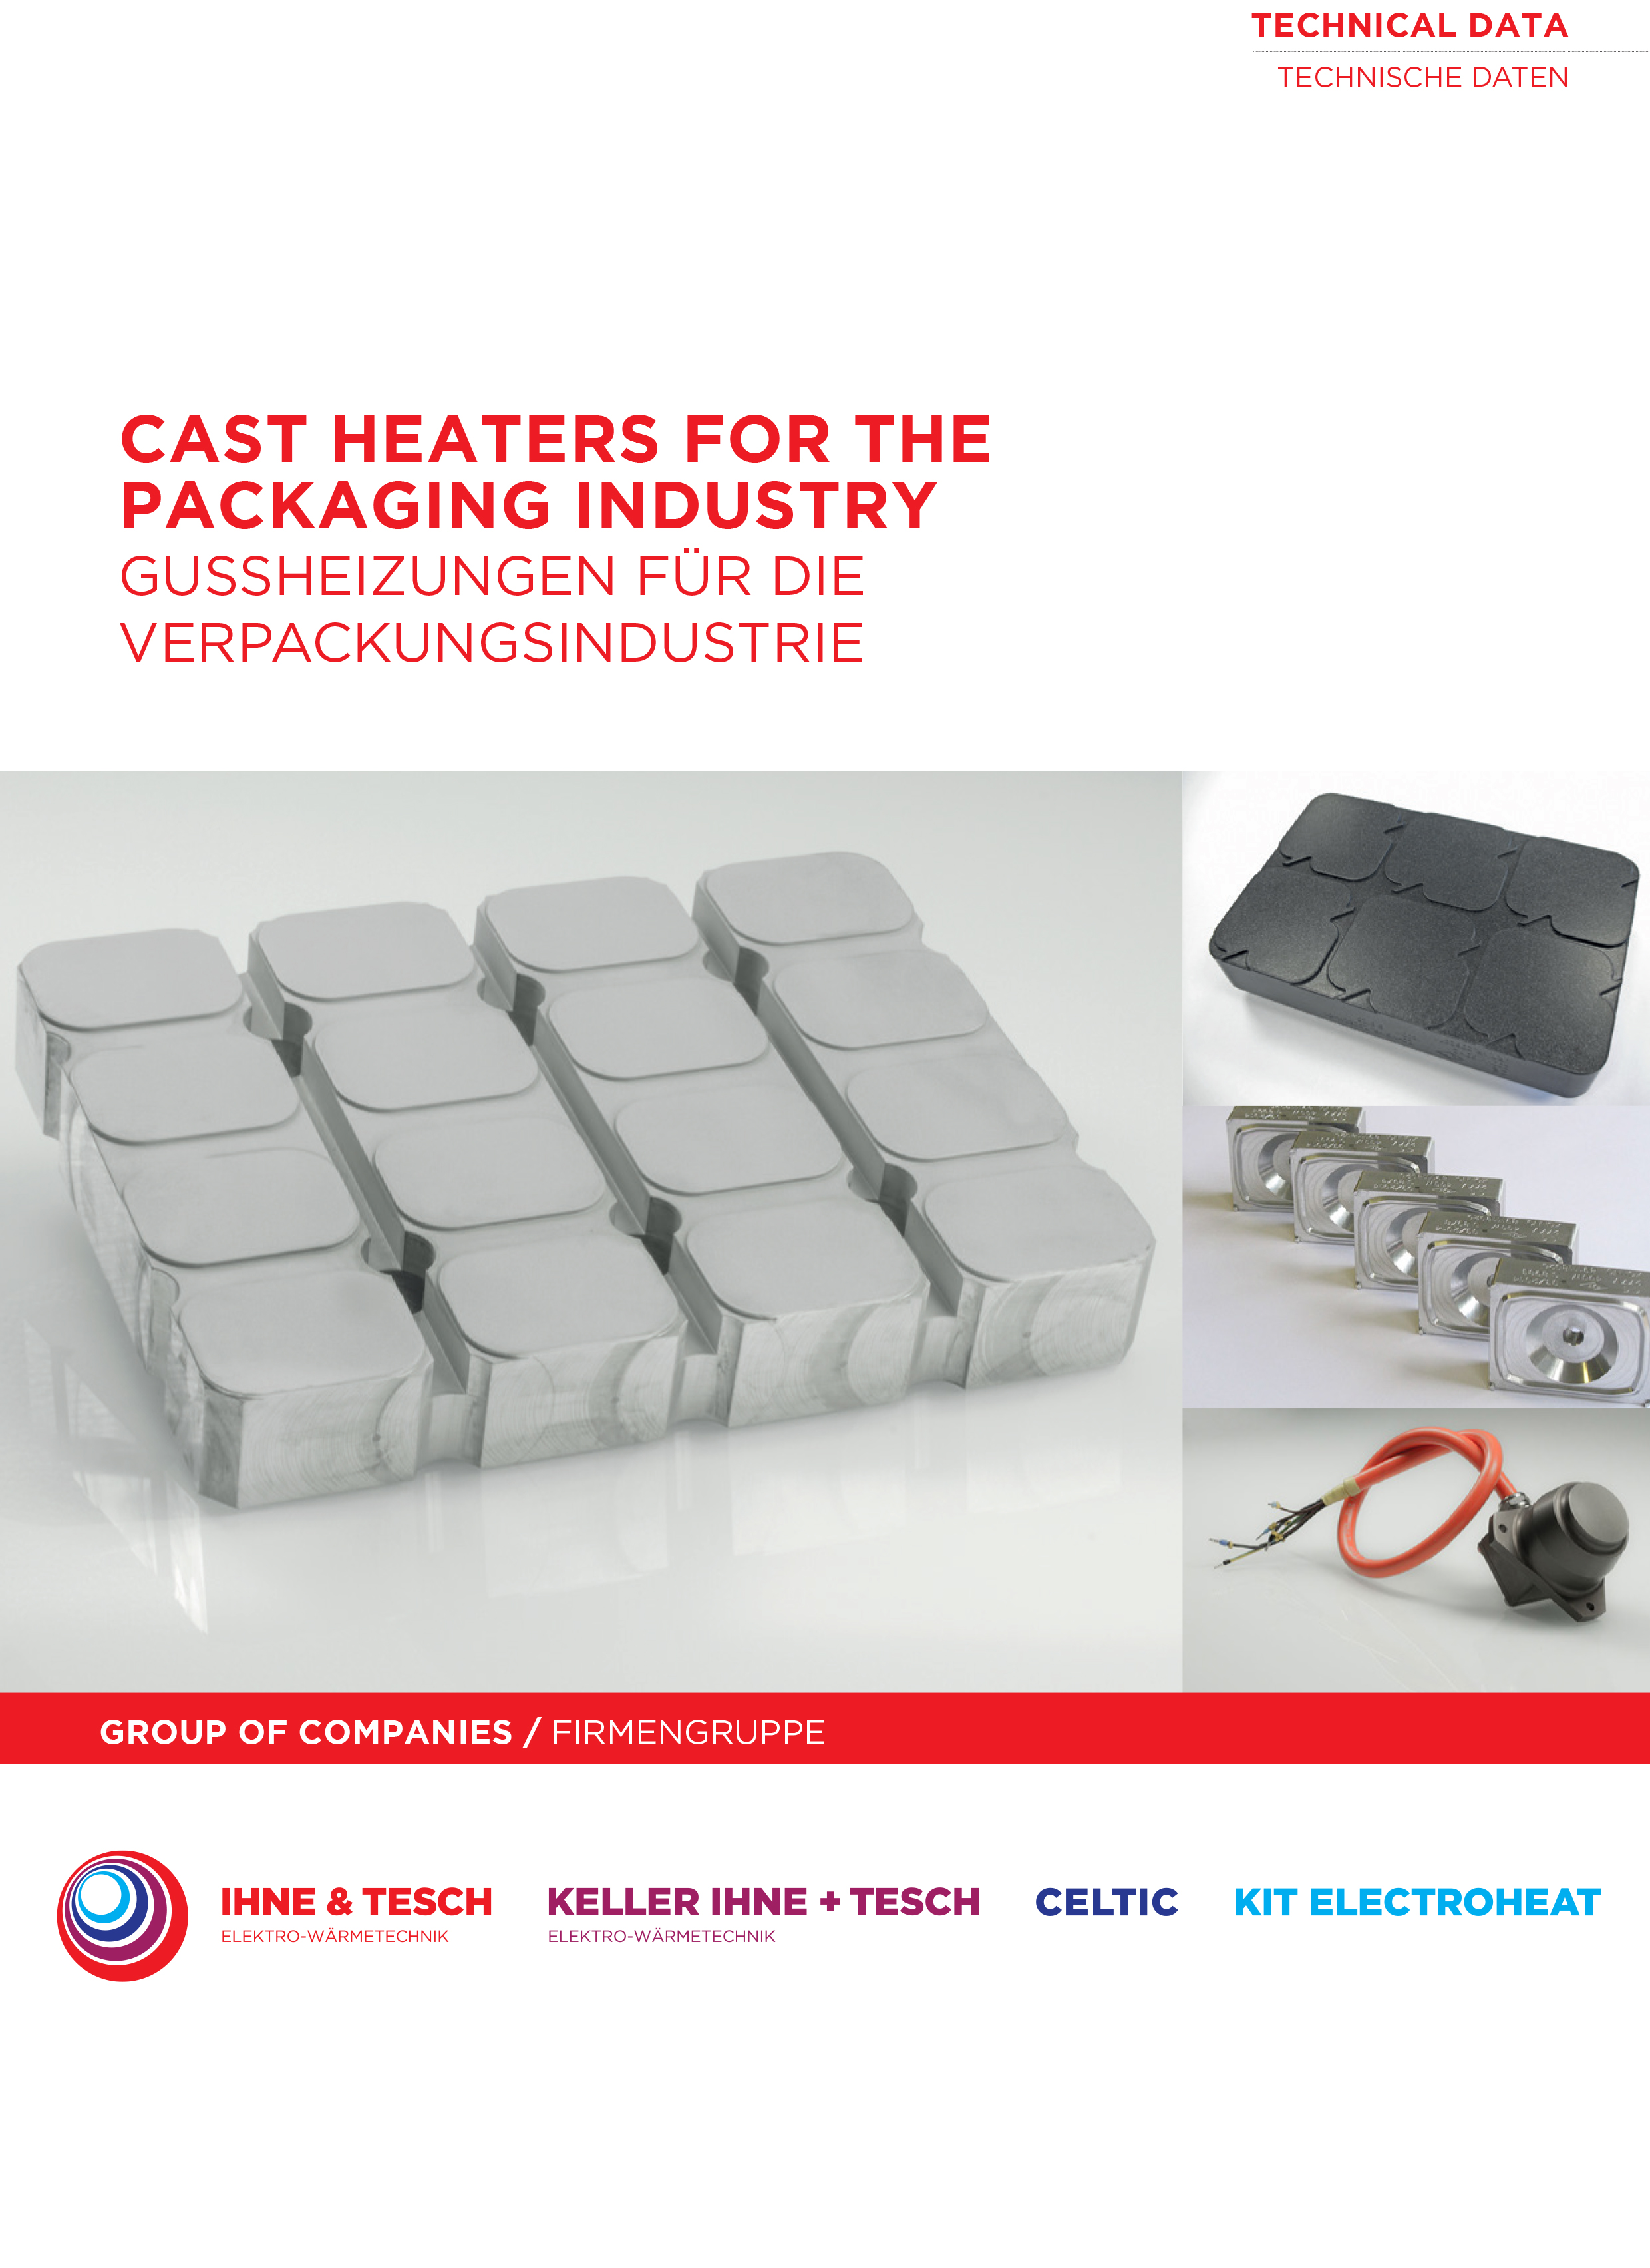 Cast-Heaters-Packaging-Industry-technical-data